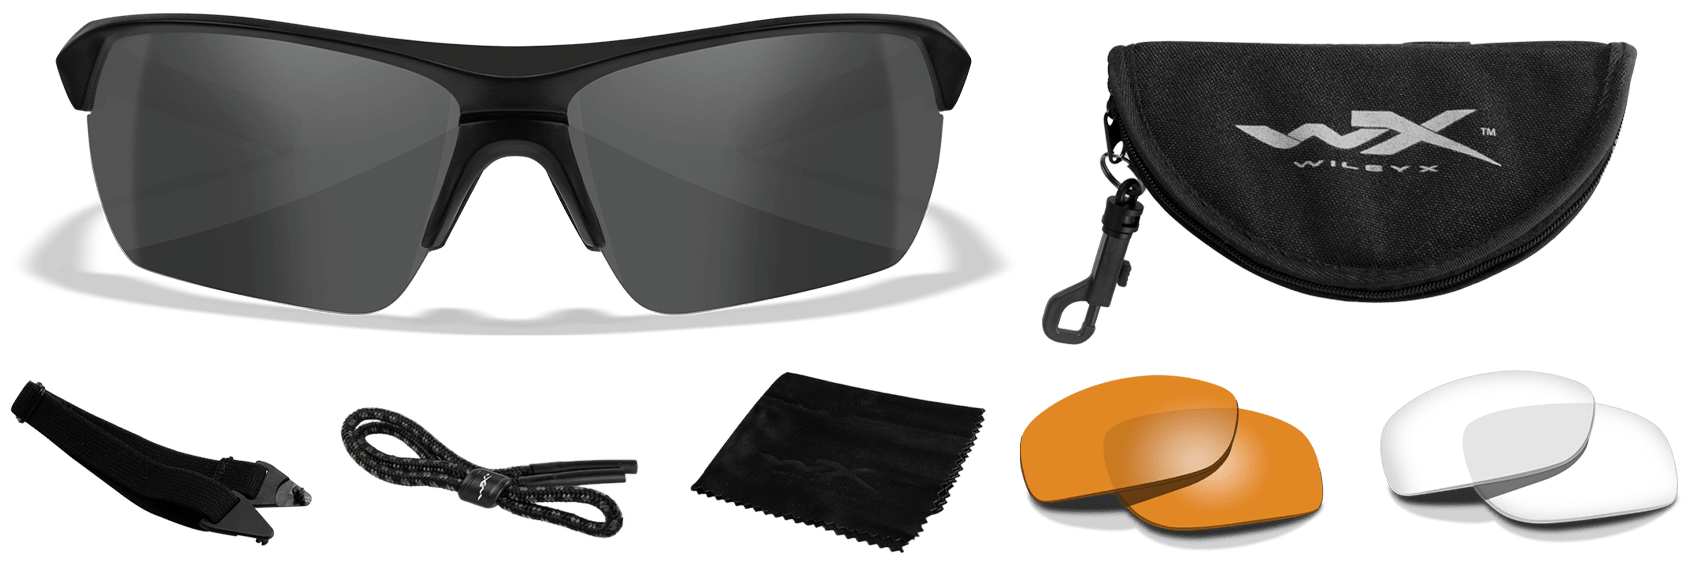 Wiley X Guard Advanced Safety Glasses Kit Components